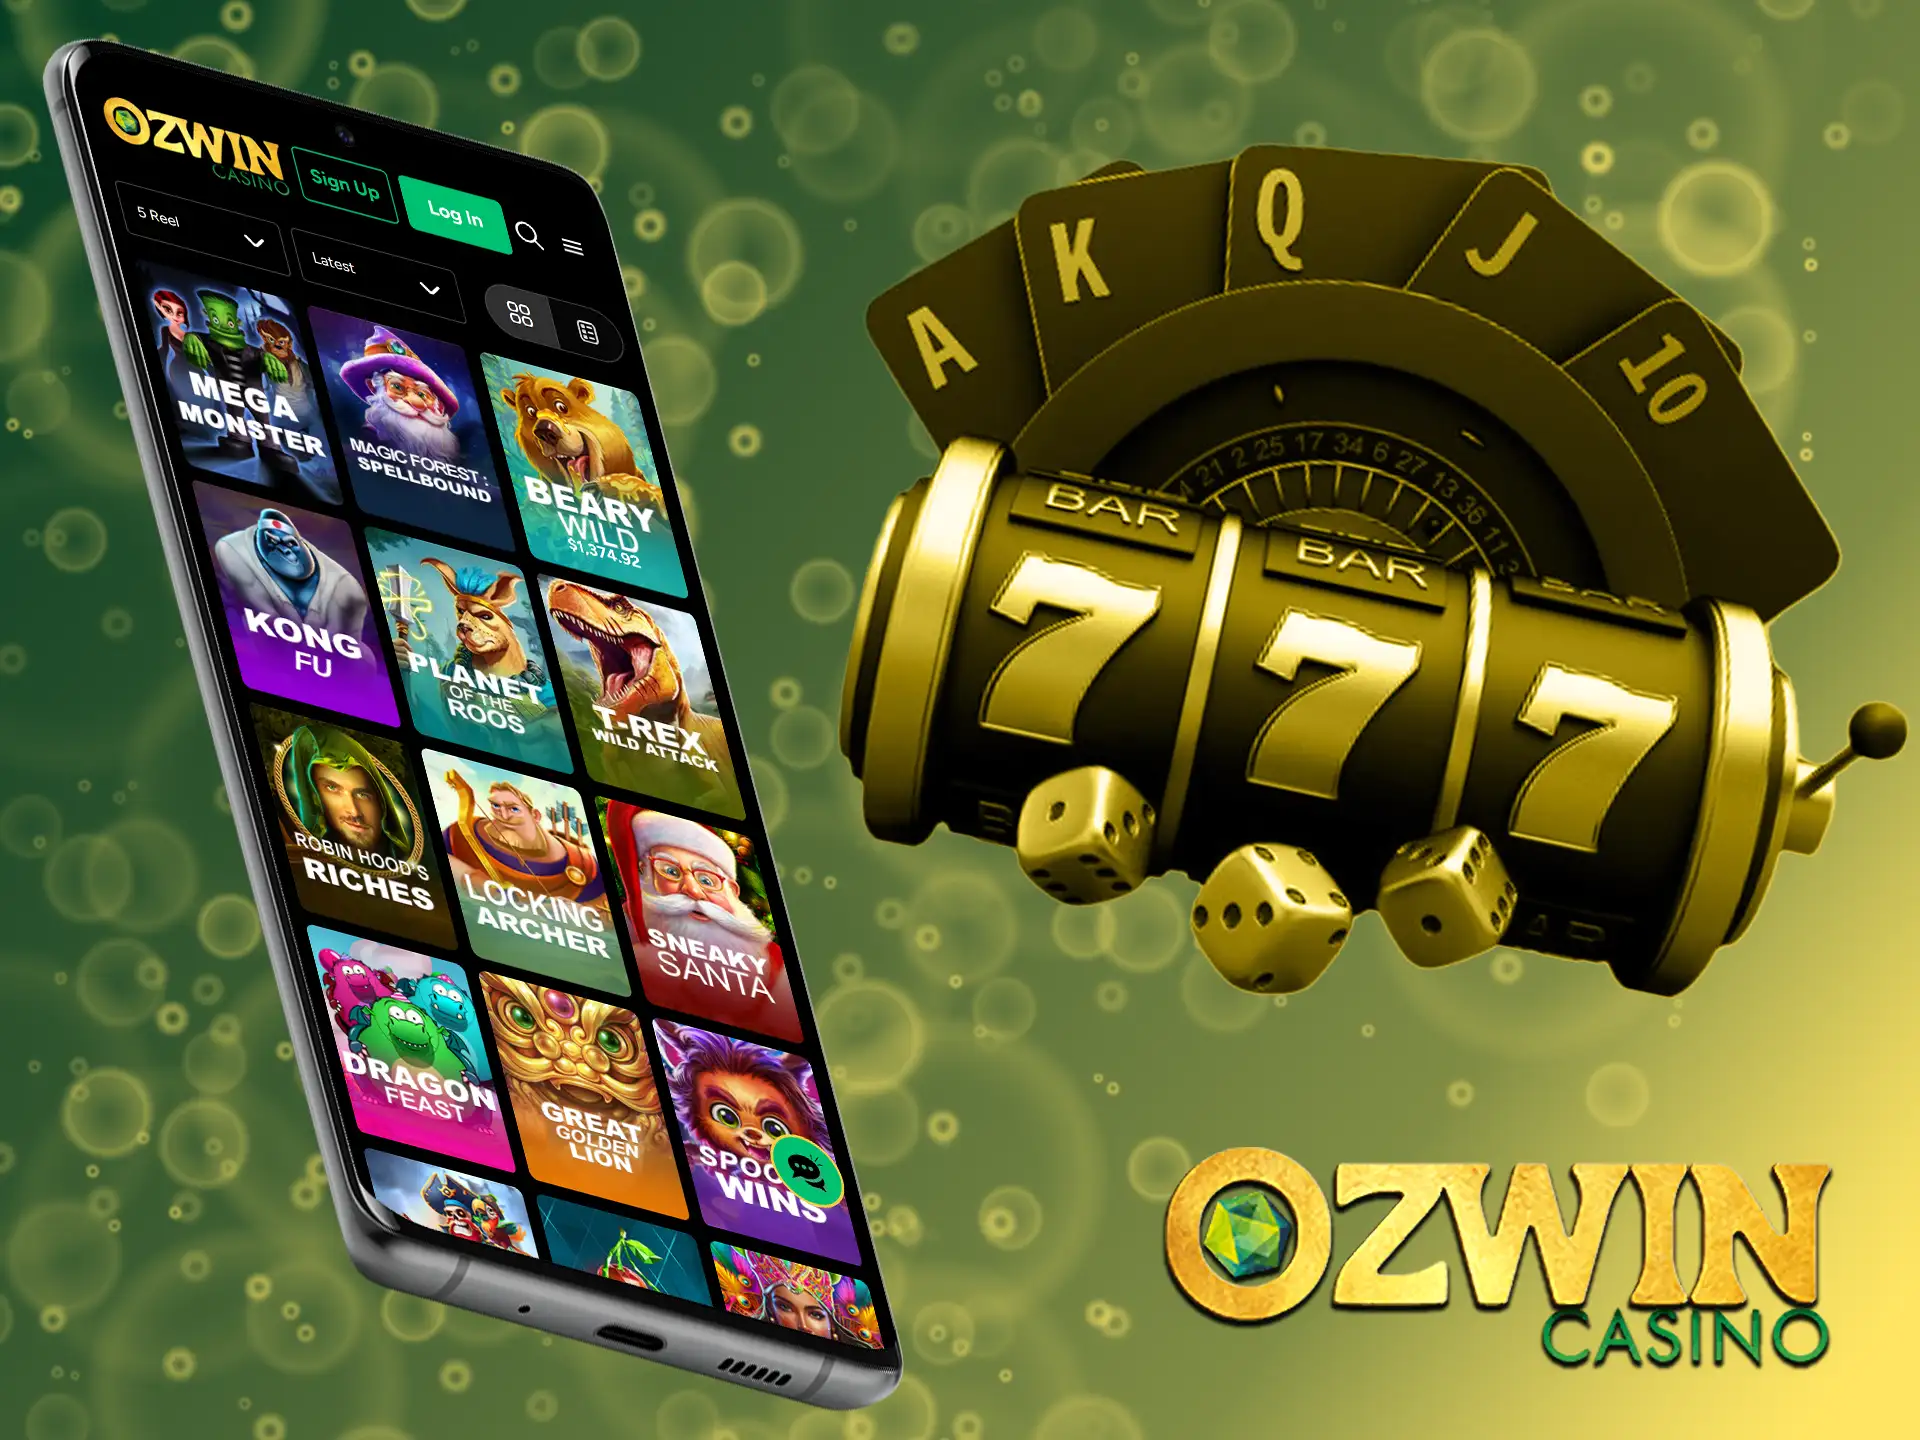 You can easily find your favorite slot game on Ozwin.